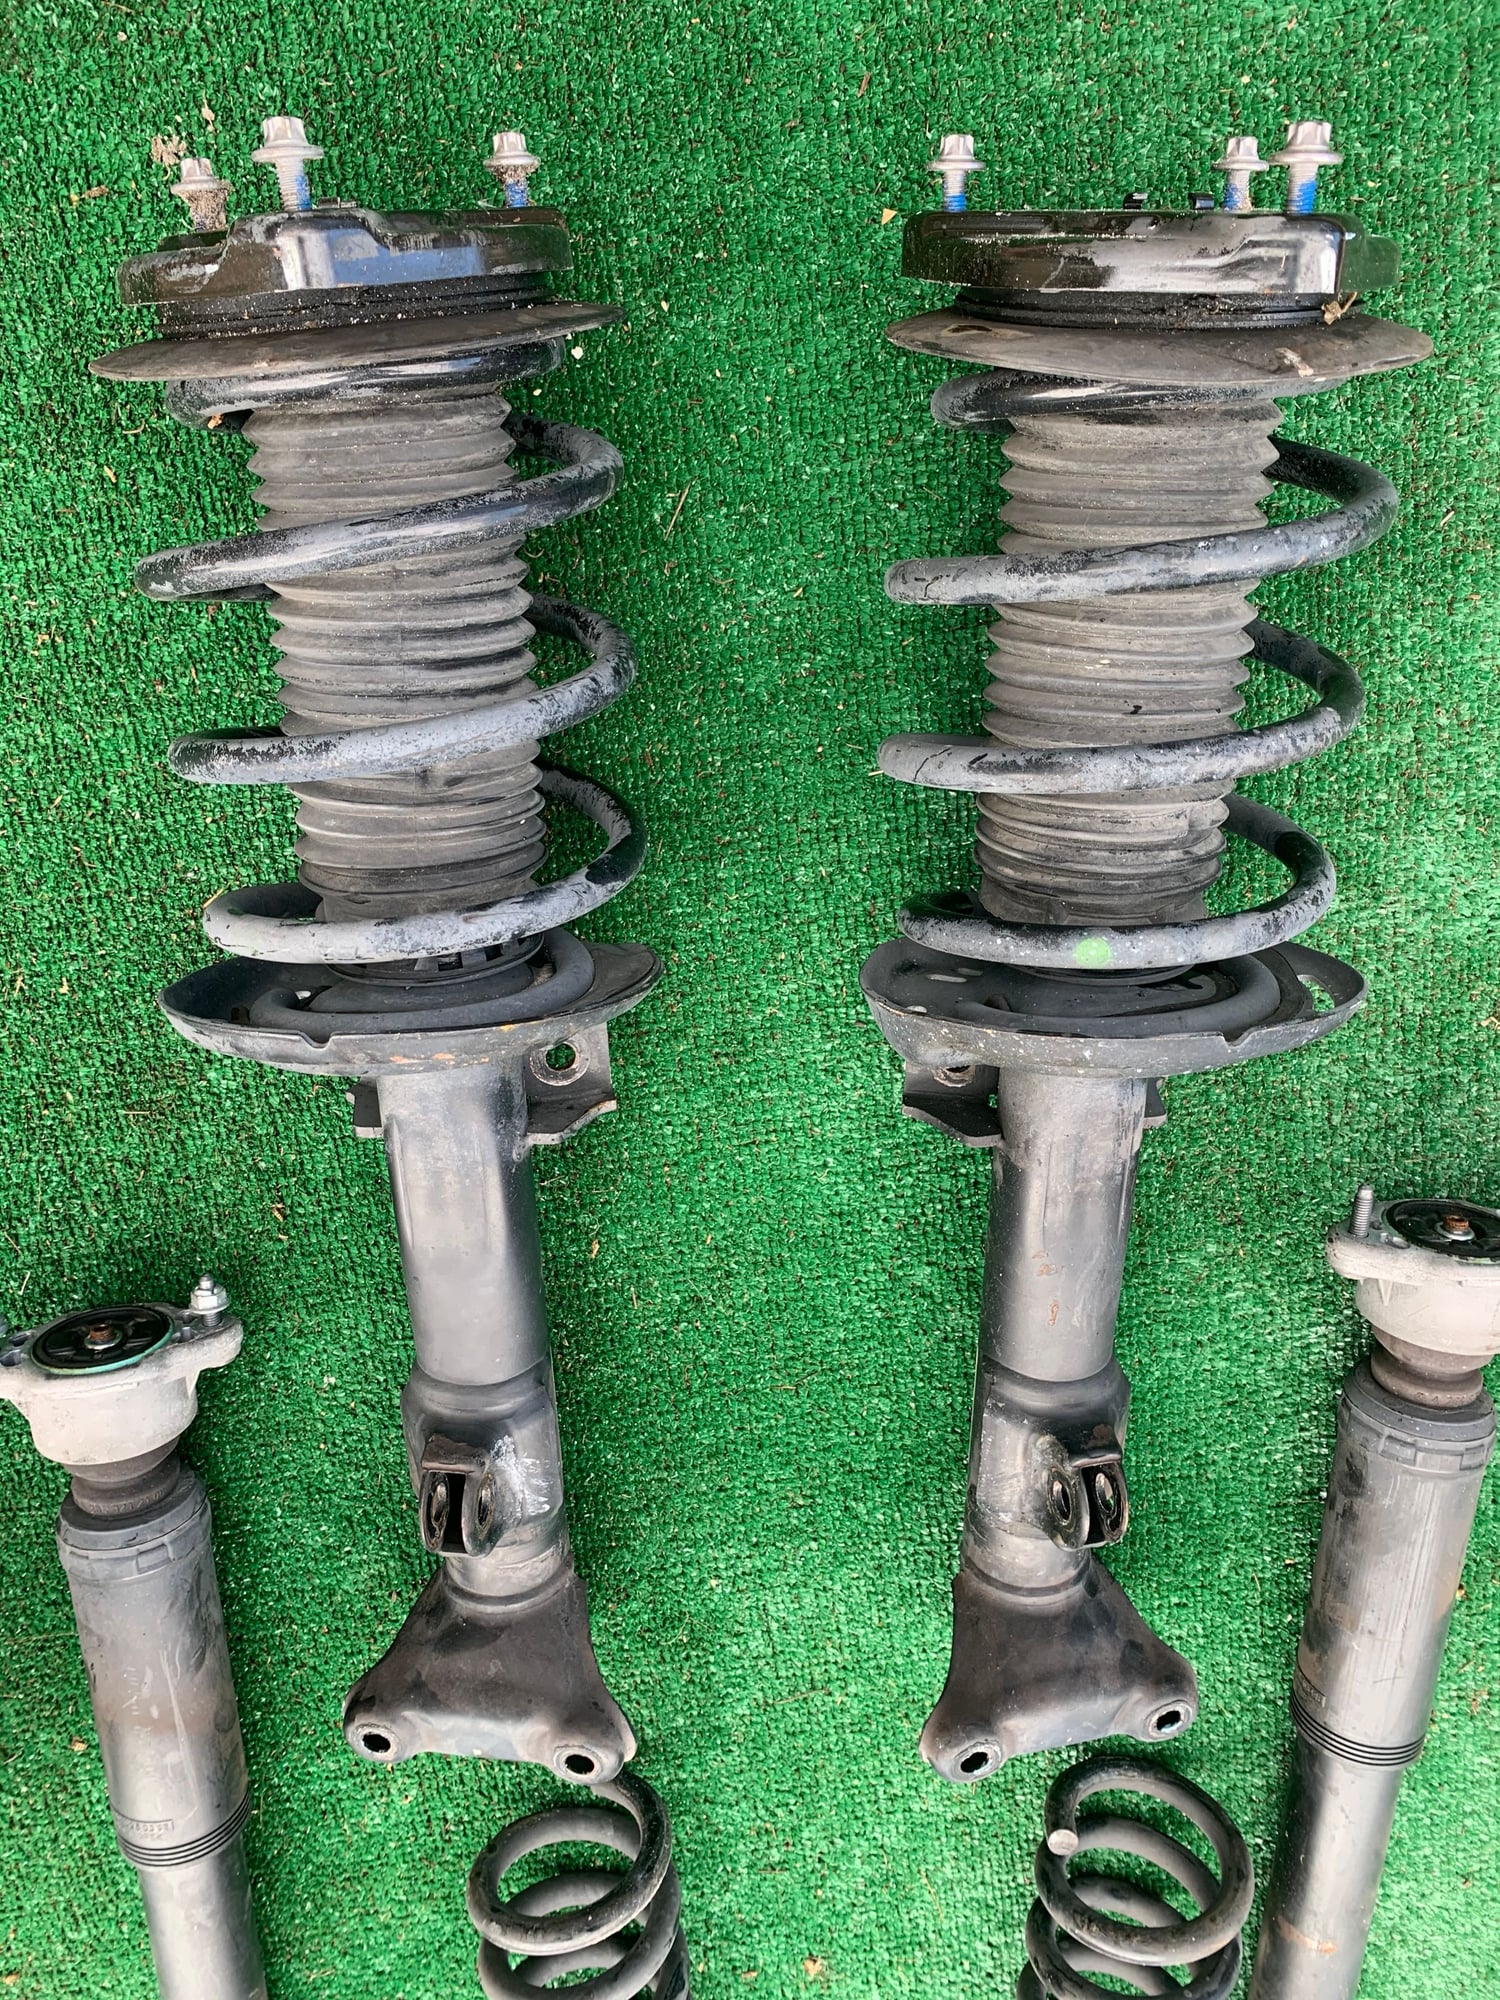 Steering/Suspension - Full Suspension (Front Struts, Rear Absorber, and Springs) 2014 C63 Coupe - Used - 2014 Mercedes-Benz C63 AMG - Boca Raton, FL 33434, United States